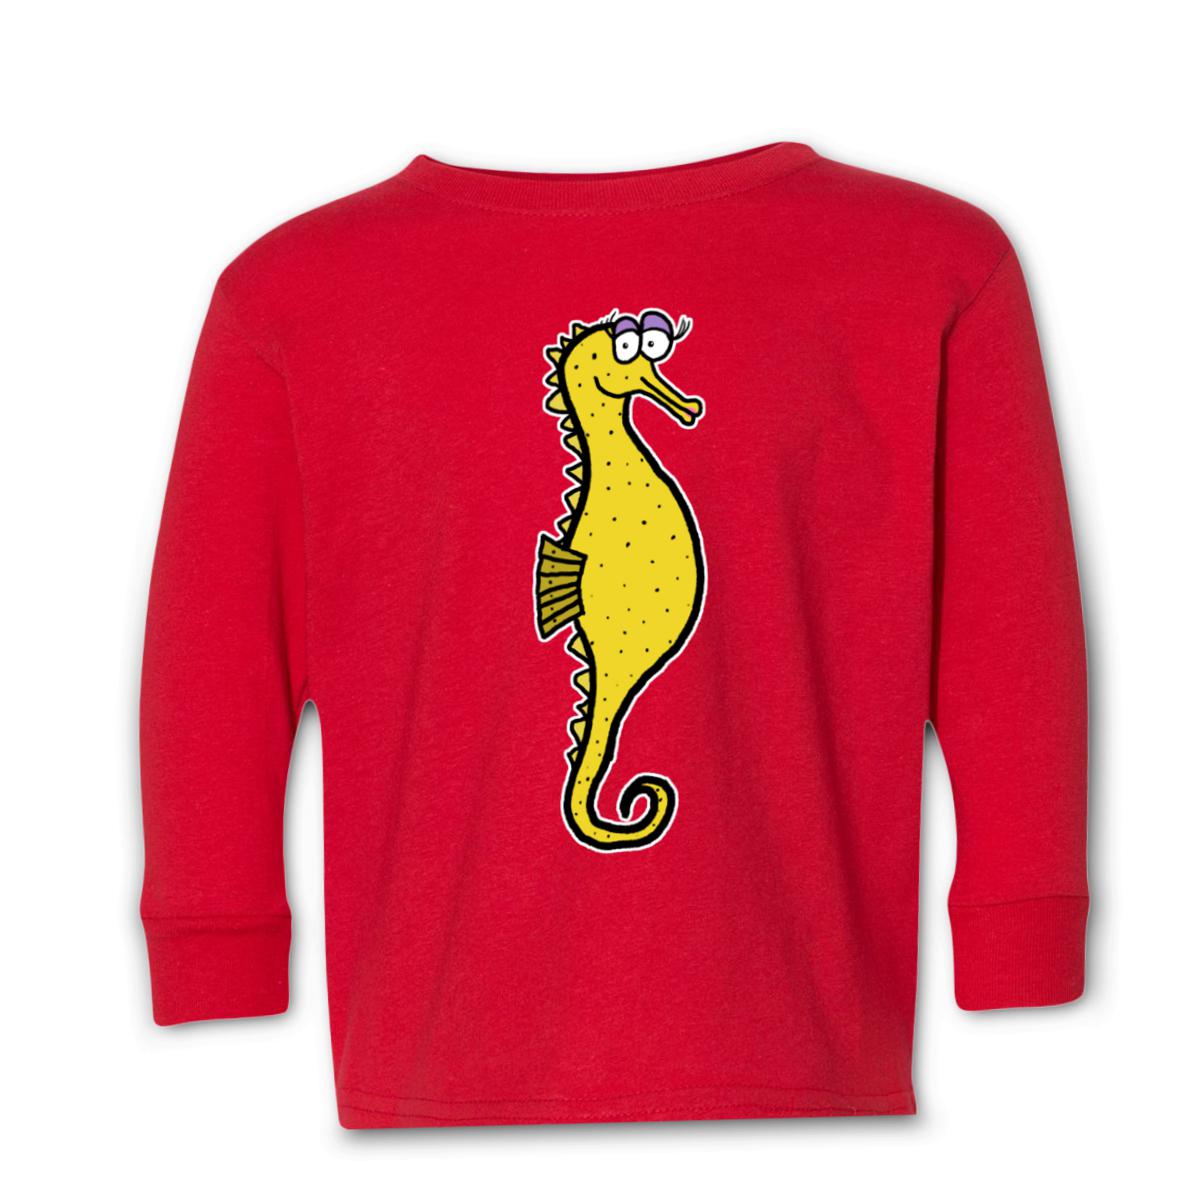 Seahorse Toddler Long Sleeve Tee 4T red